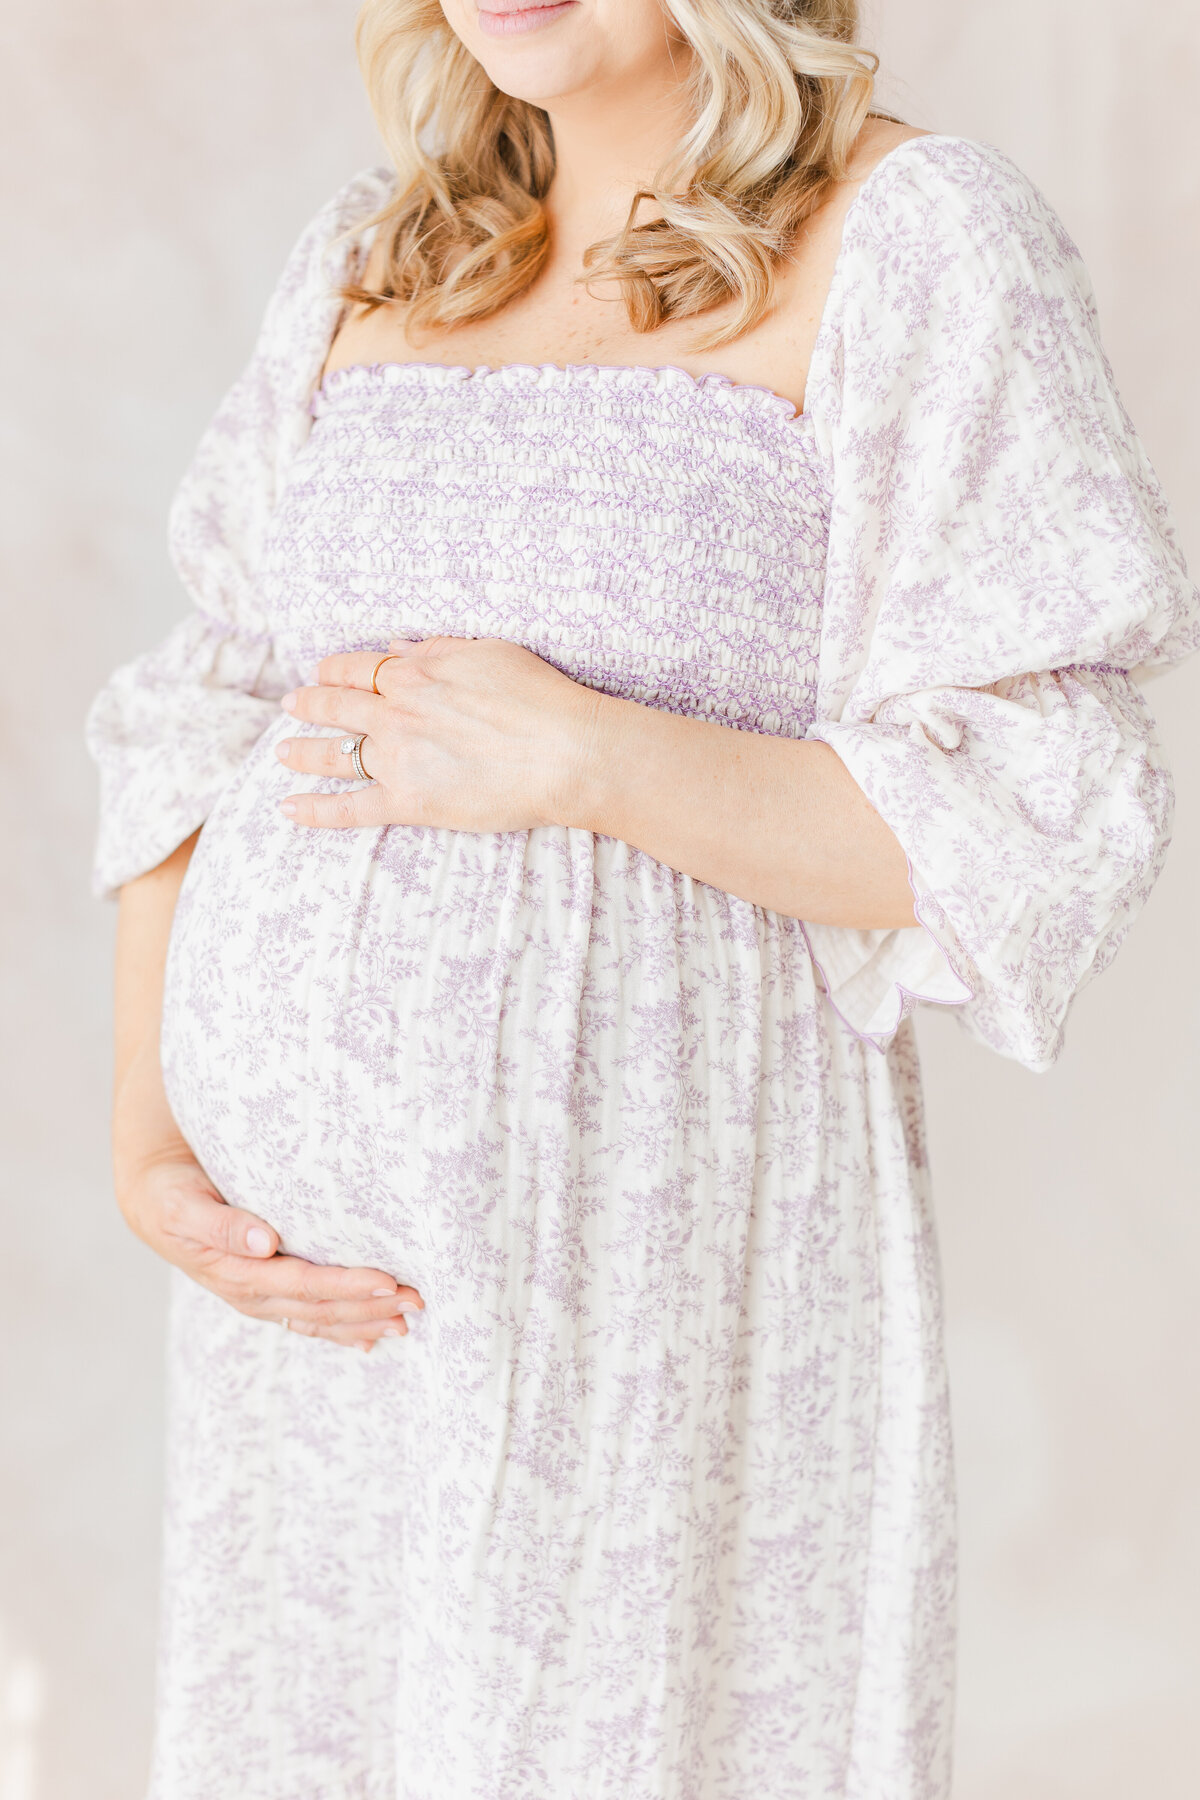 A photo of a pregnant mother holding her belly in front of a hand-painted canvas backdrop by Northern Virginia Maternity Photographer Northern Virginia Maternity Photographer